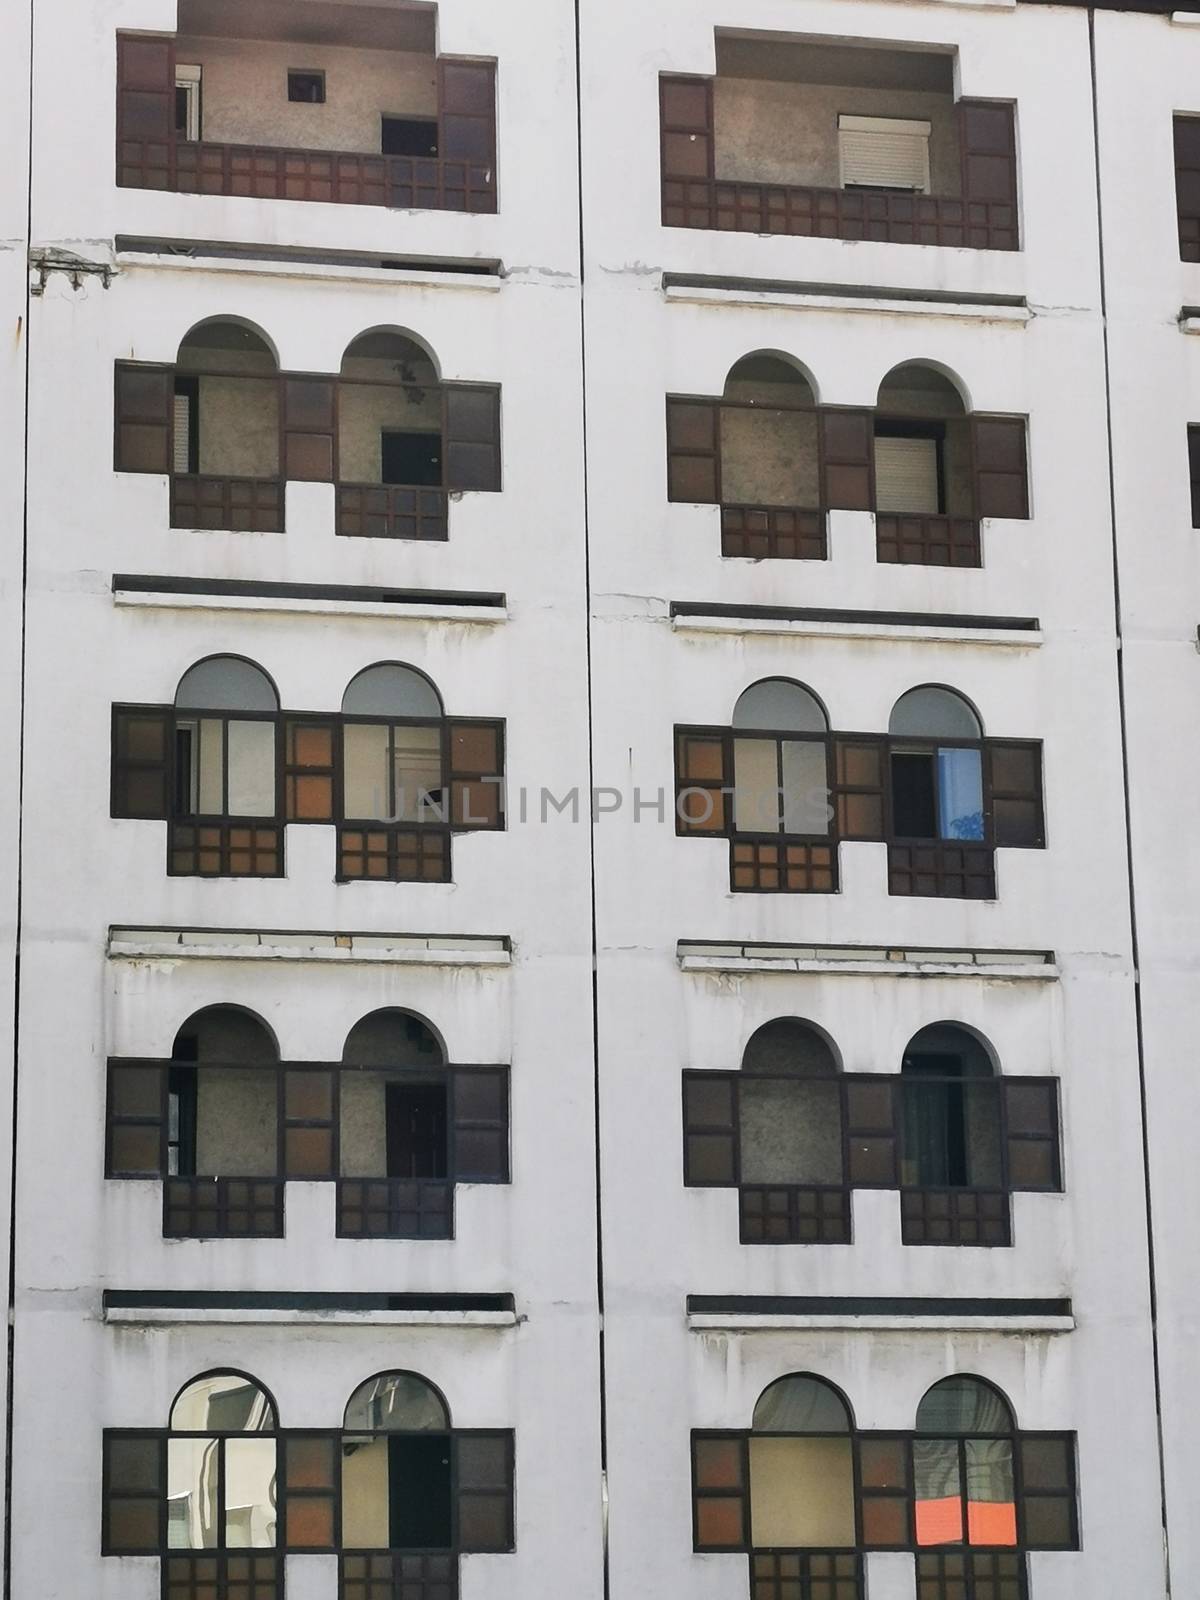 Windows of a great white building in Miskolc by balage941